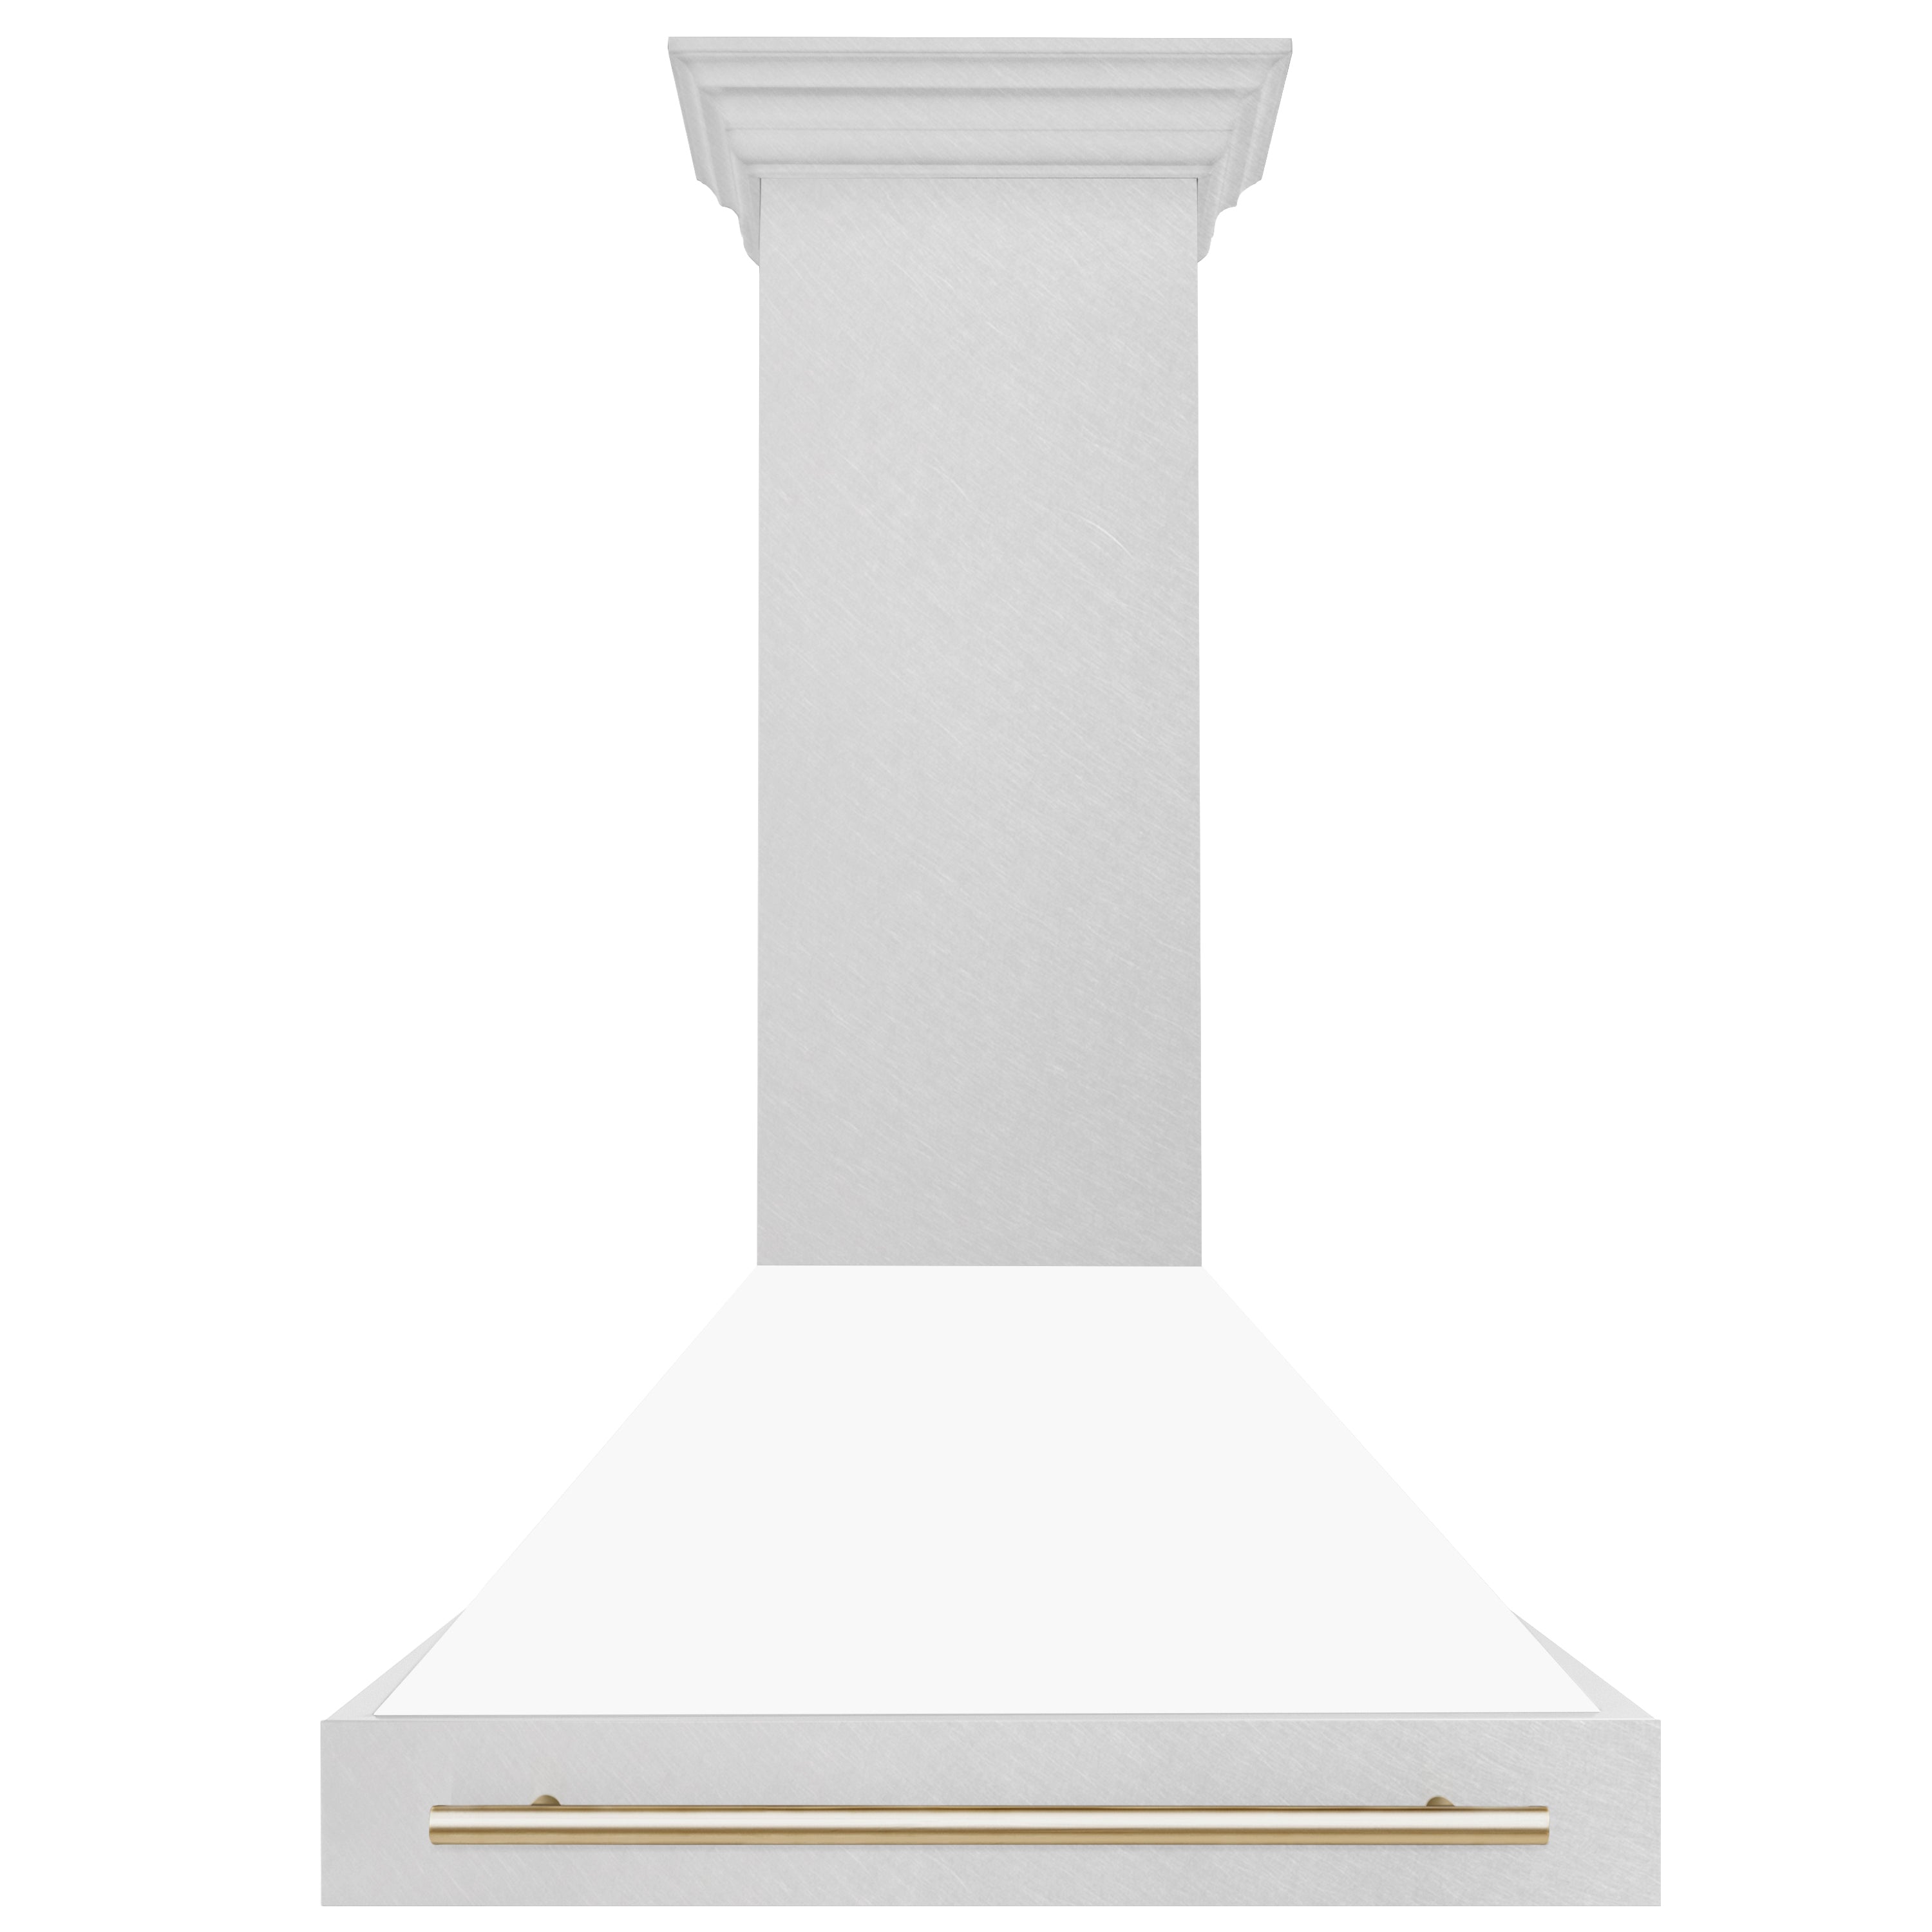 ZLINE 36" Autograph Edition Fingerprint Resistant Stainless Steel Range Hood with White Matte Shell and Gold Handle (8654SNZ-WM36-G)